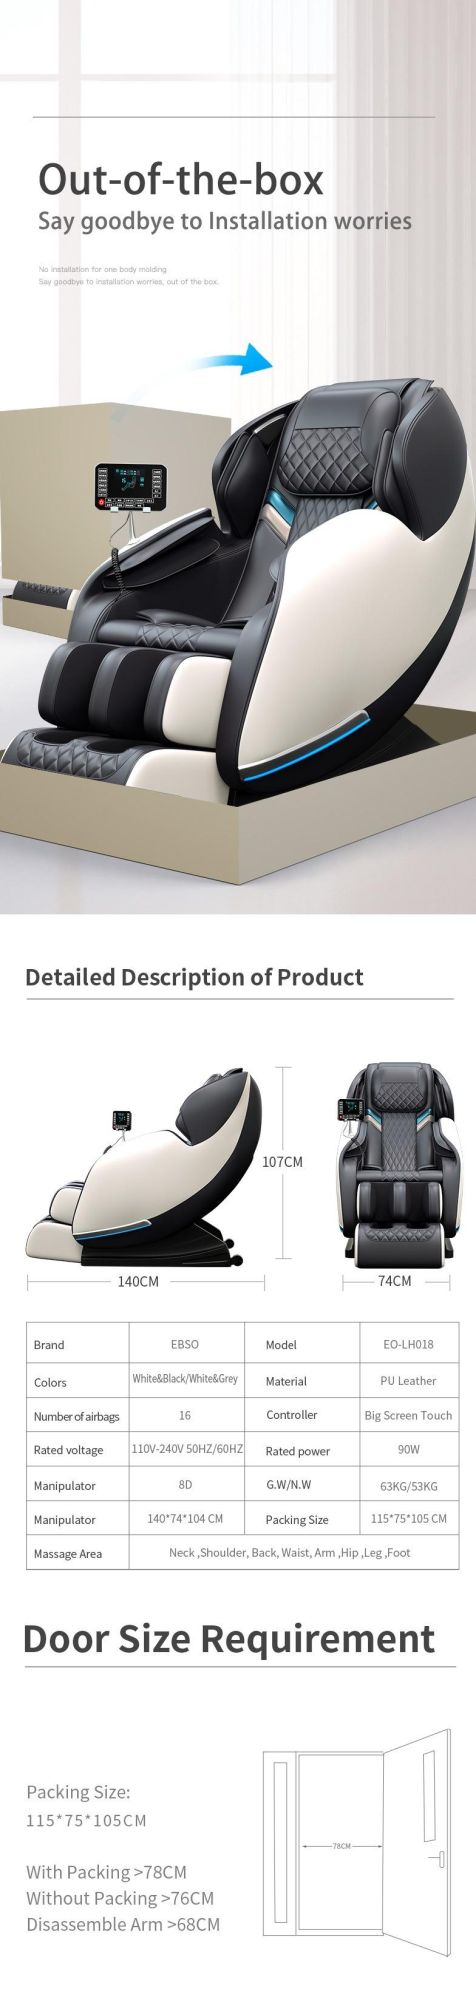 Household Robotic Full Body Massage Chair with English Display